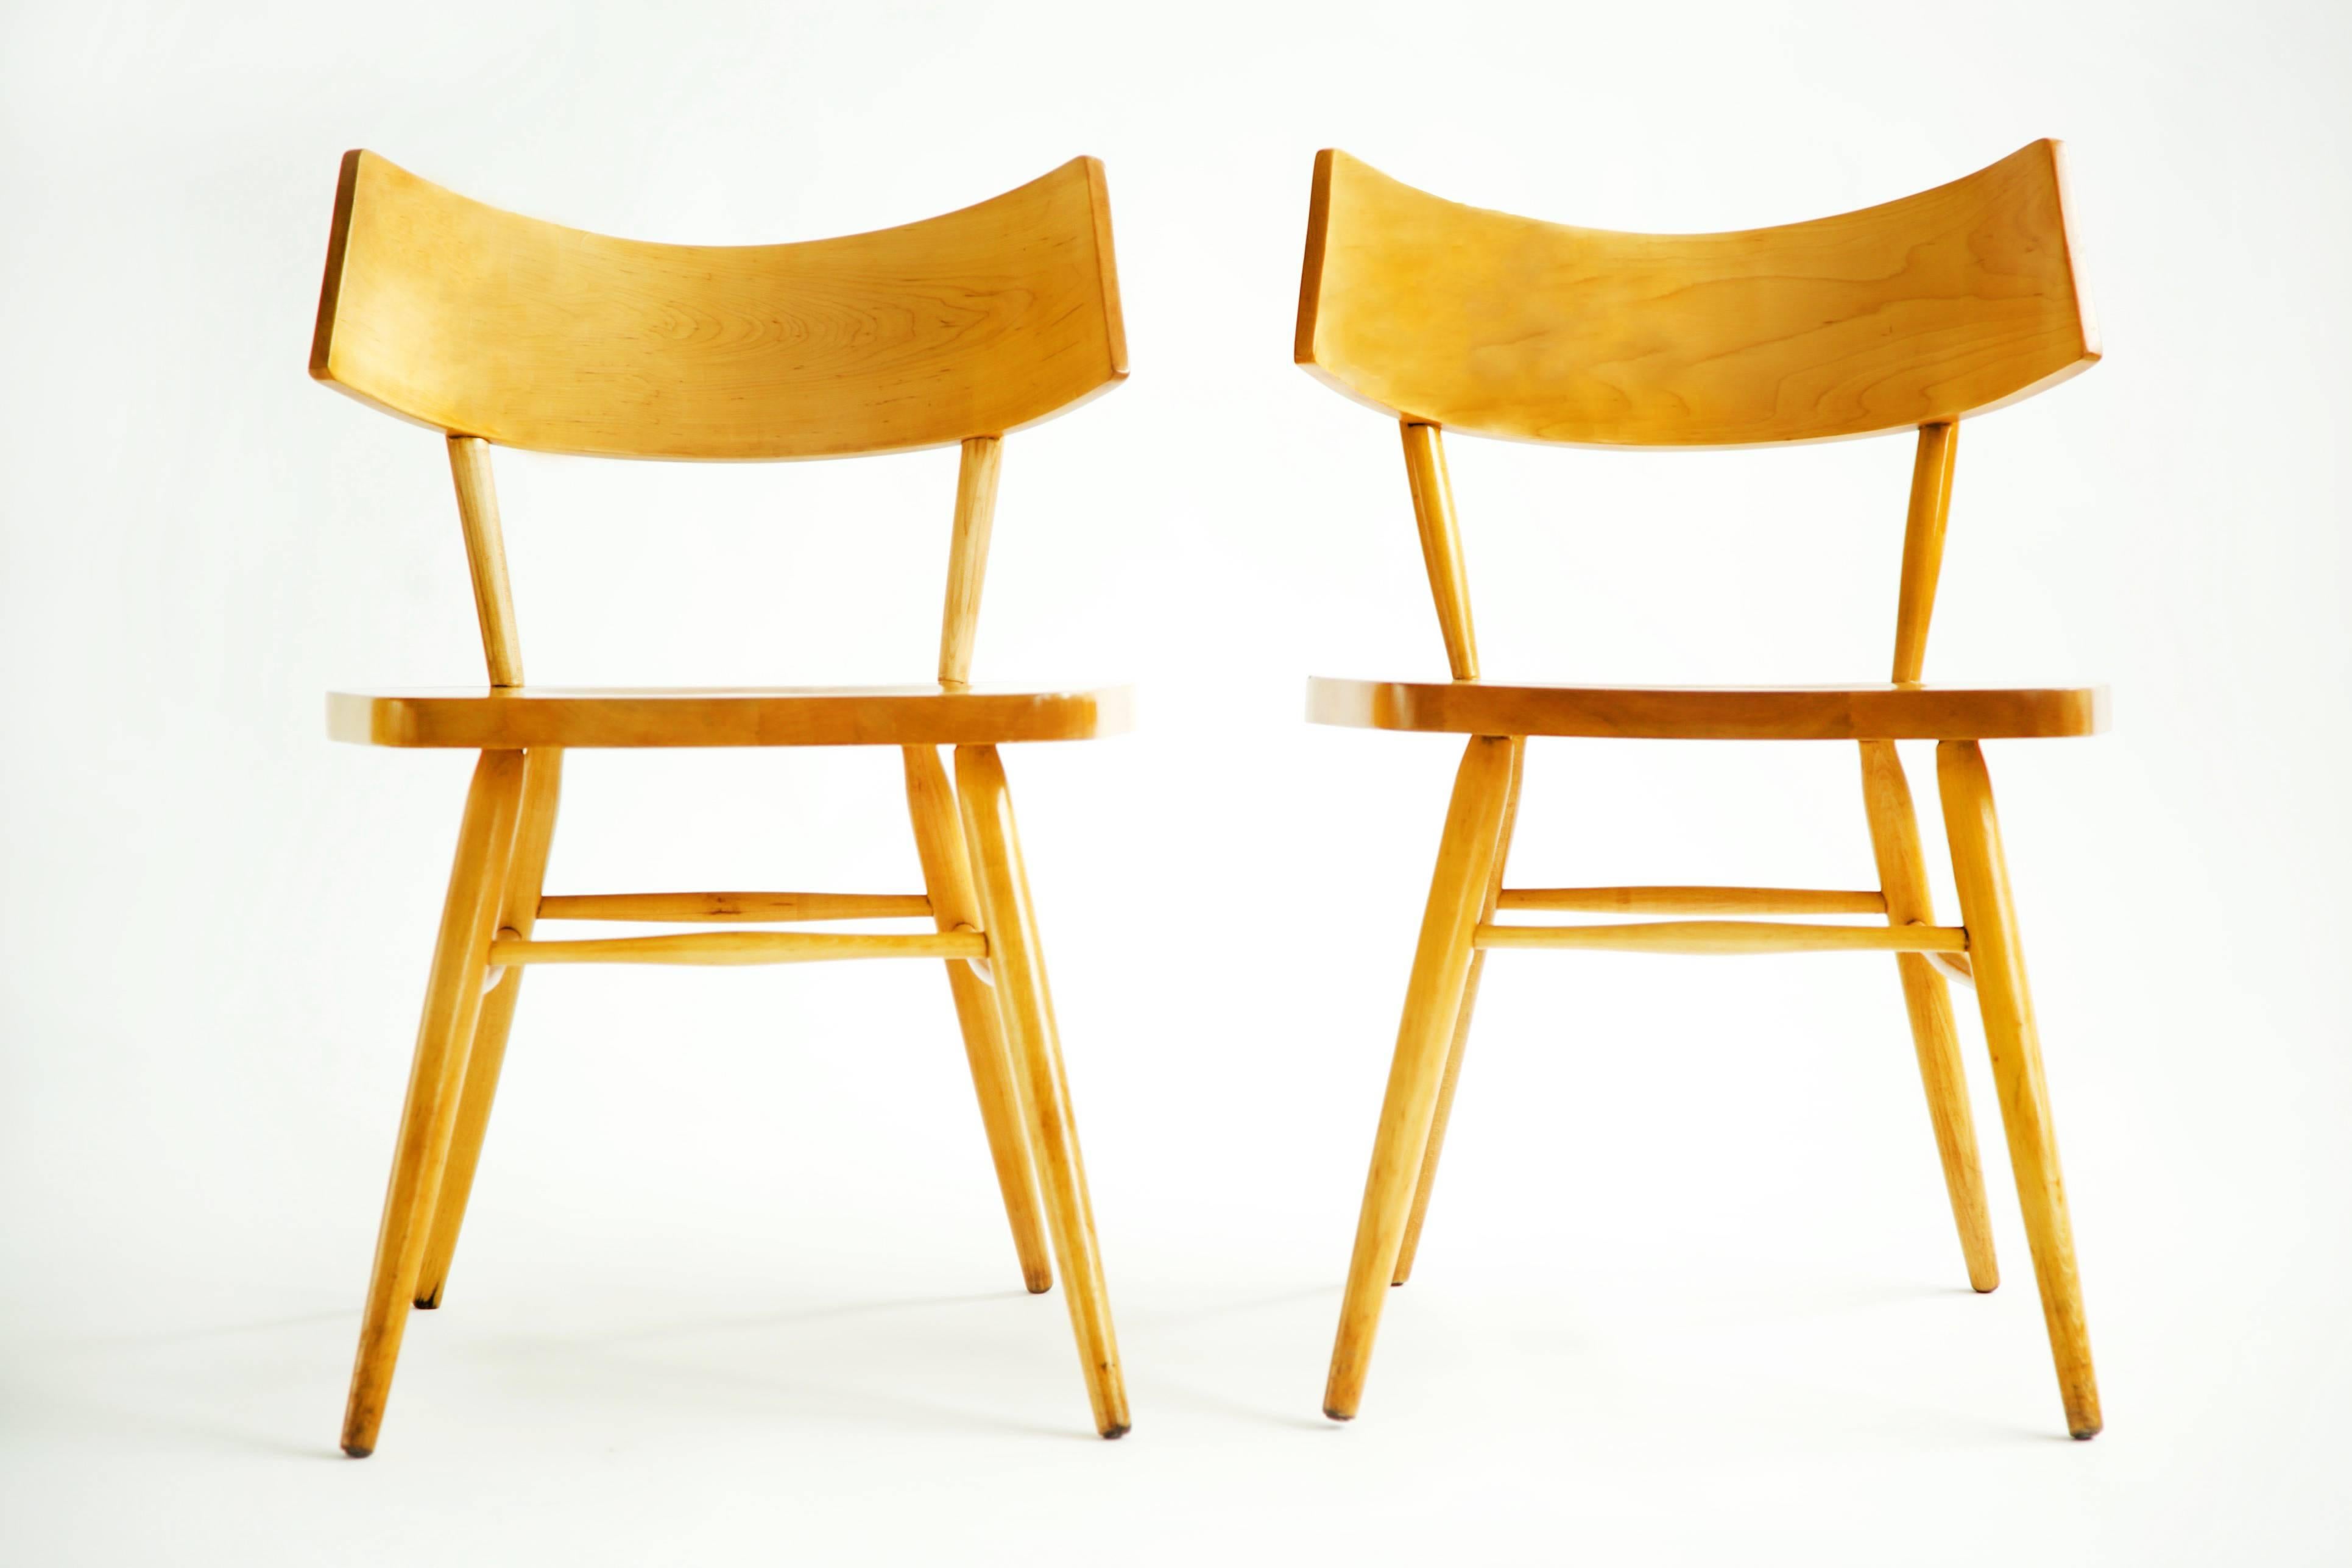 American modern chairs, lacquered bent and carved solid walnut. Klismos style curved back supported by solid dowels.